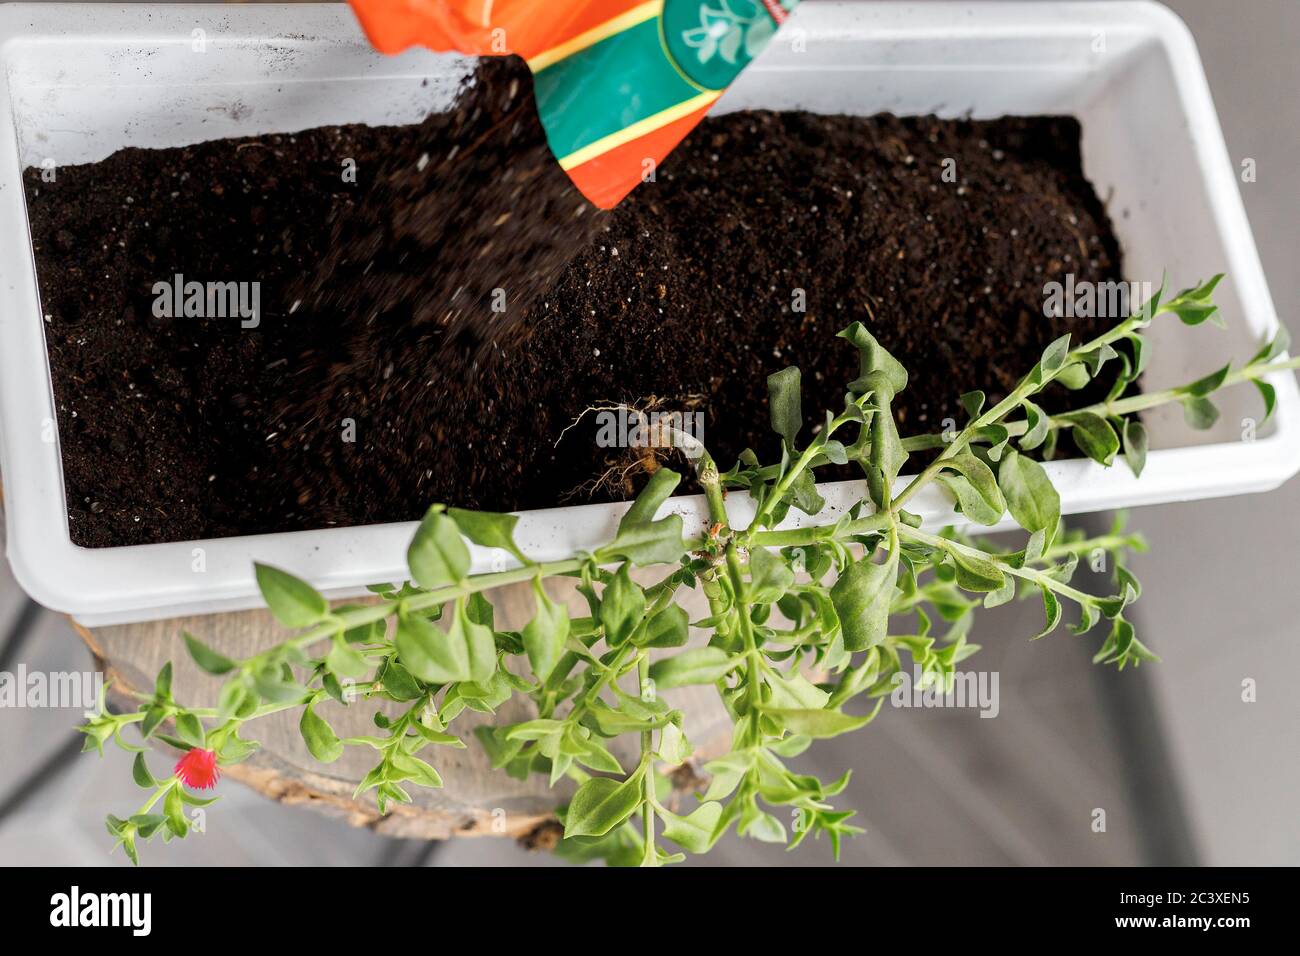 Repotting of aptenia cordifolia in blossom in white rectangular flower pot. Sun rose plant potting, top view Stock Photo